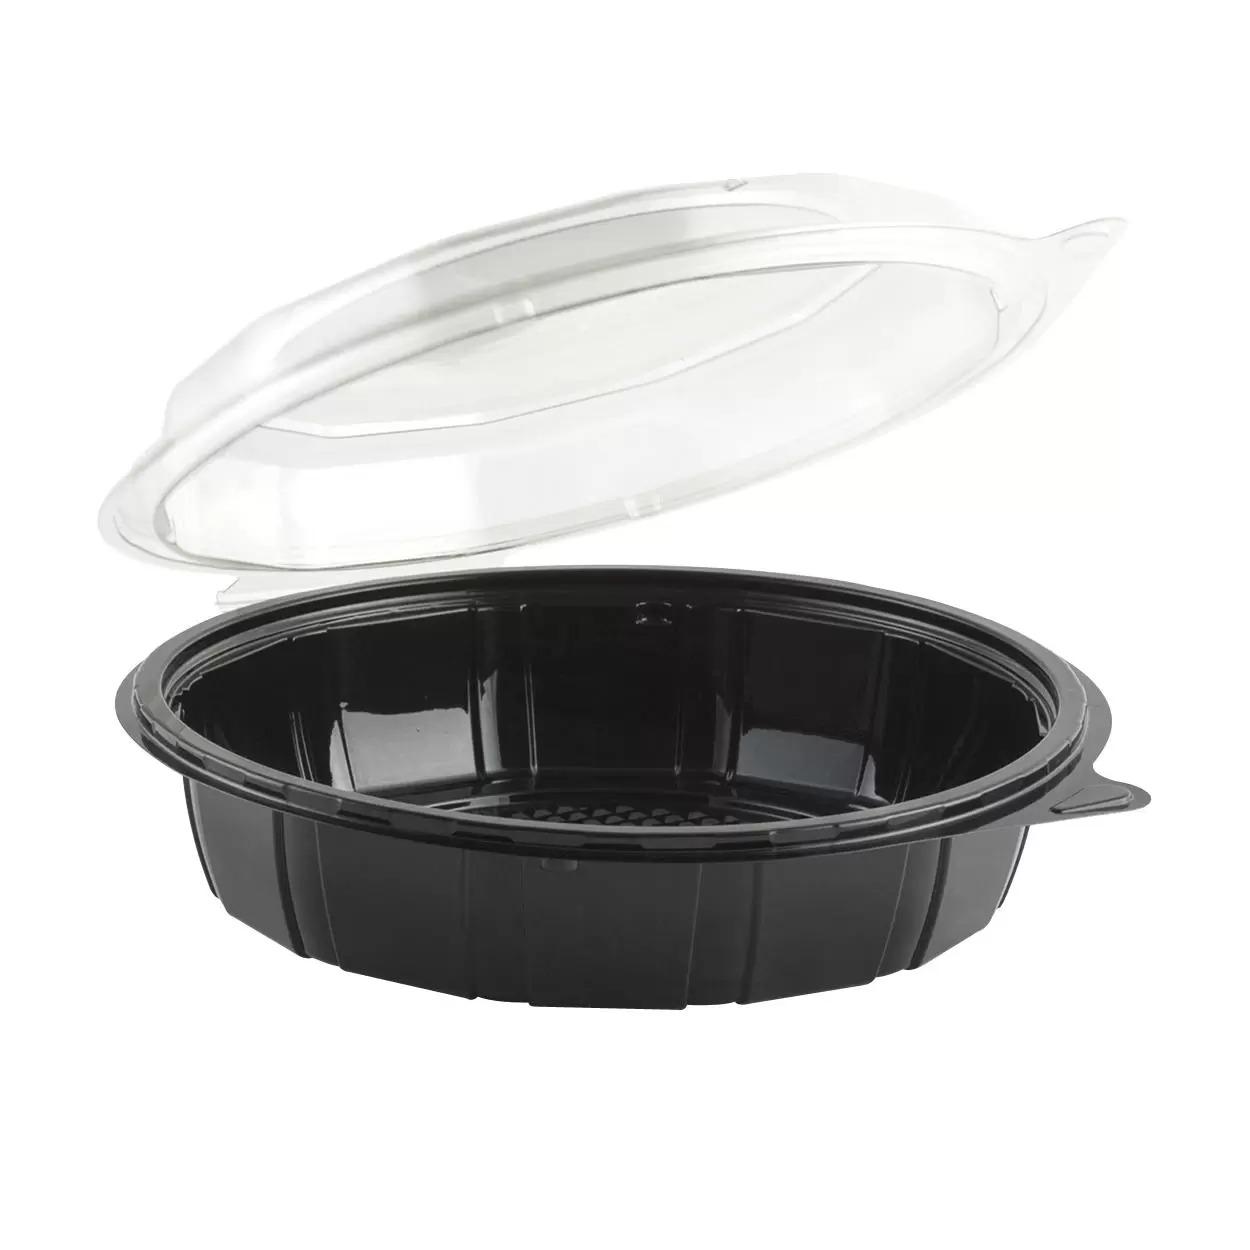 9x9 Clear Hinged-Lid Plastic Container (150/cs)